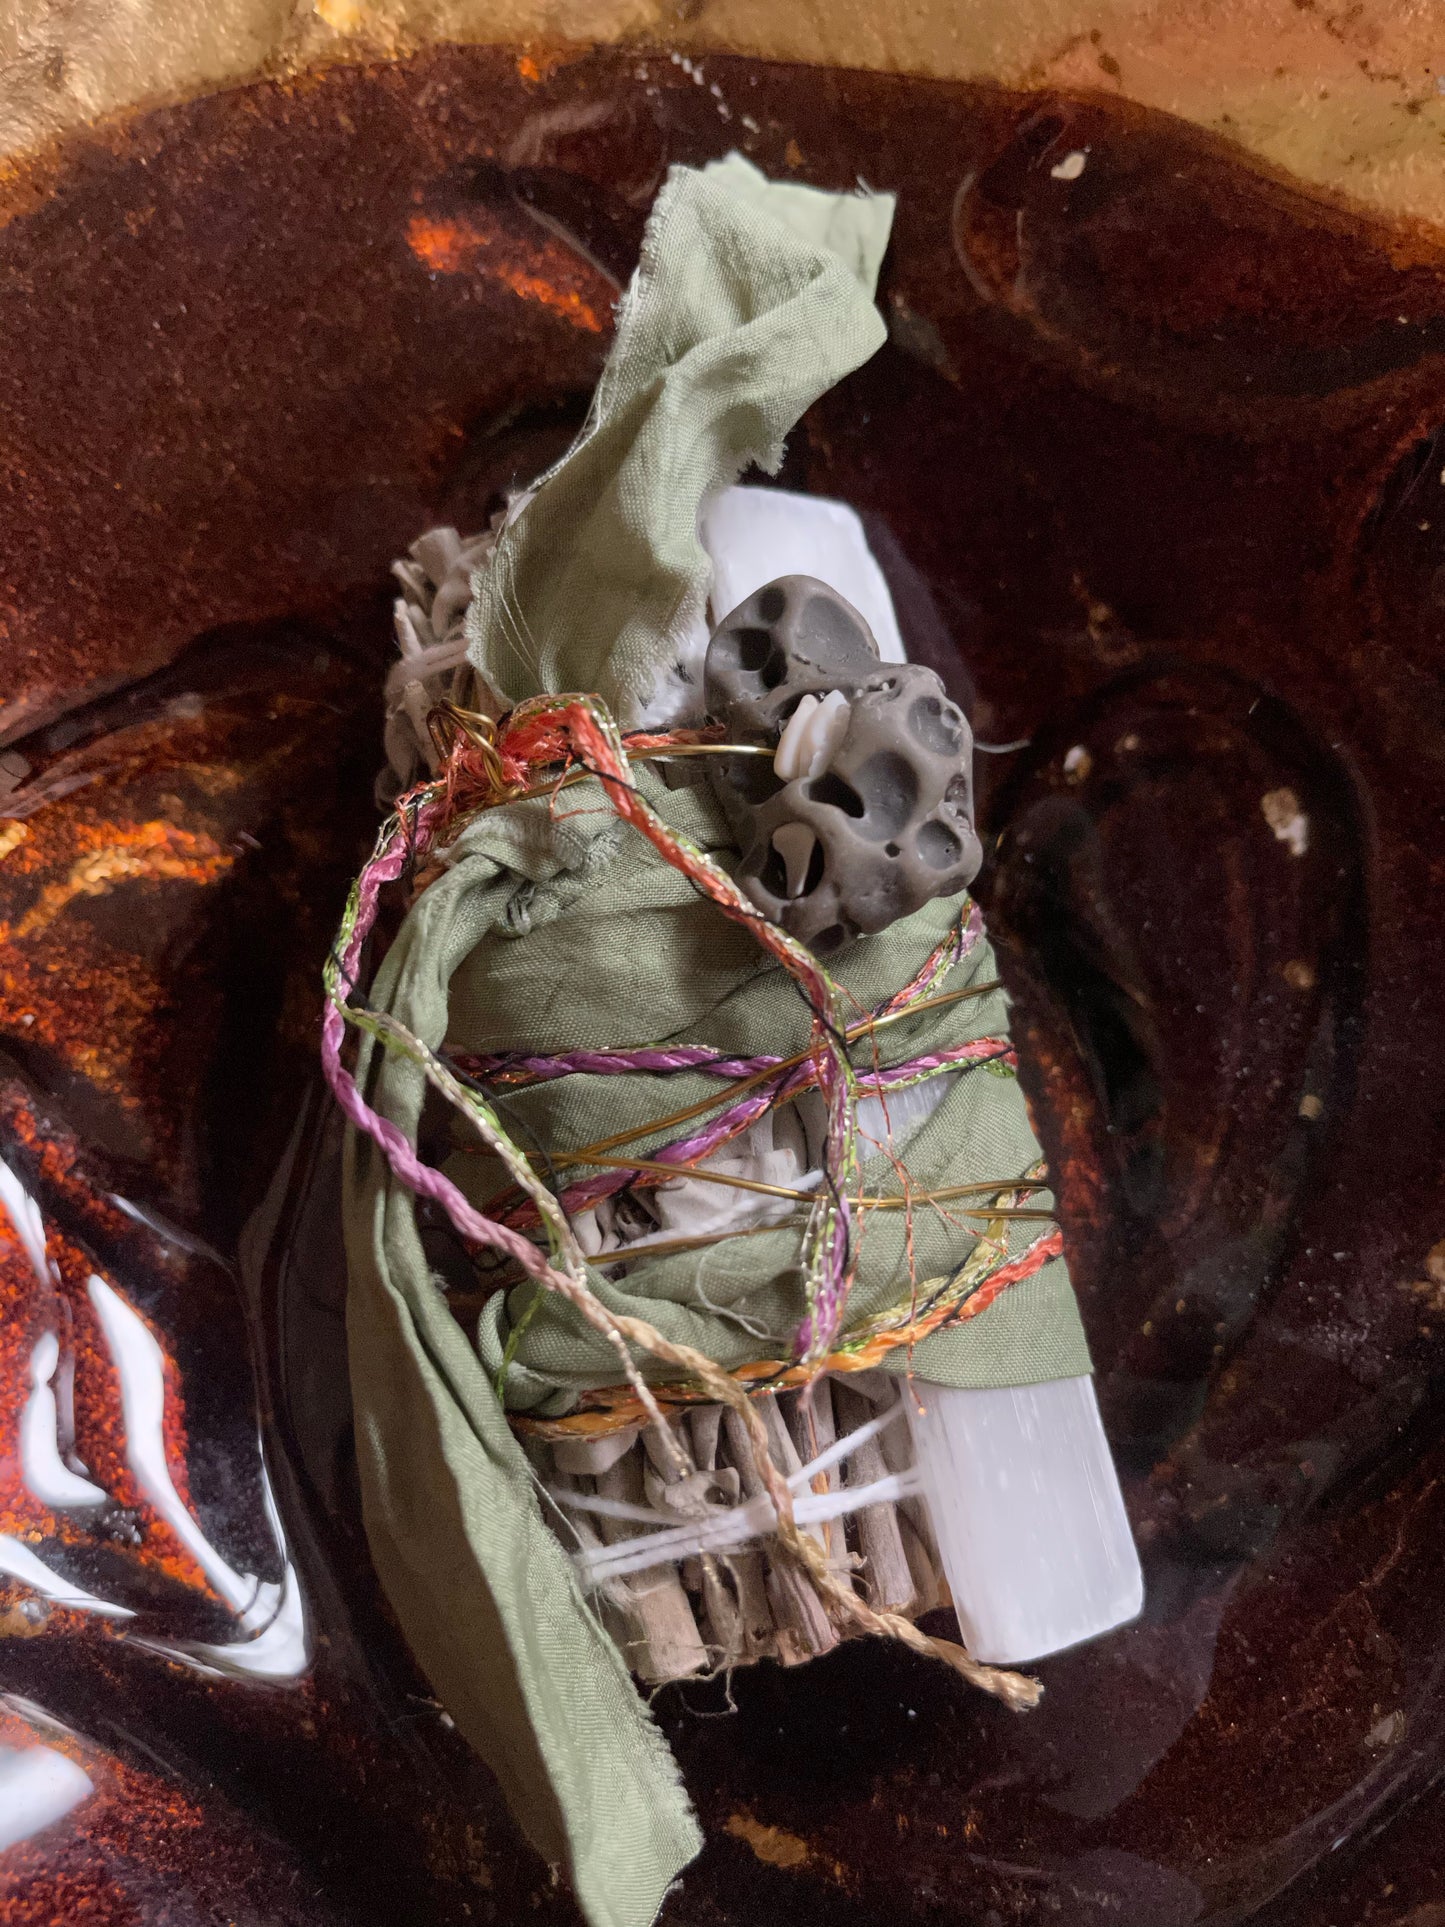 Magical Water Energy, Beach Stone Sage Bundles, Gift Sets